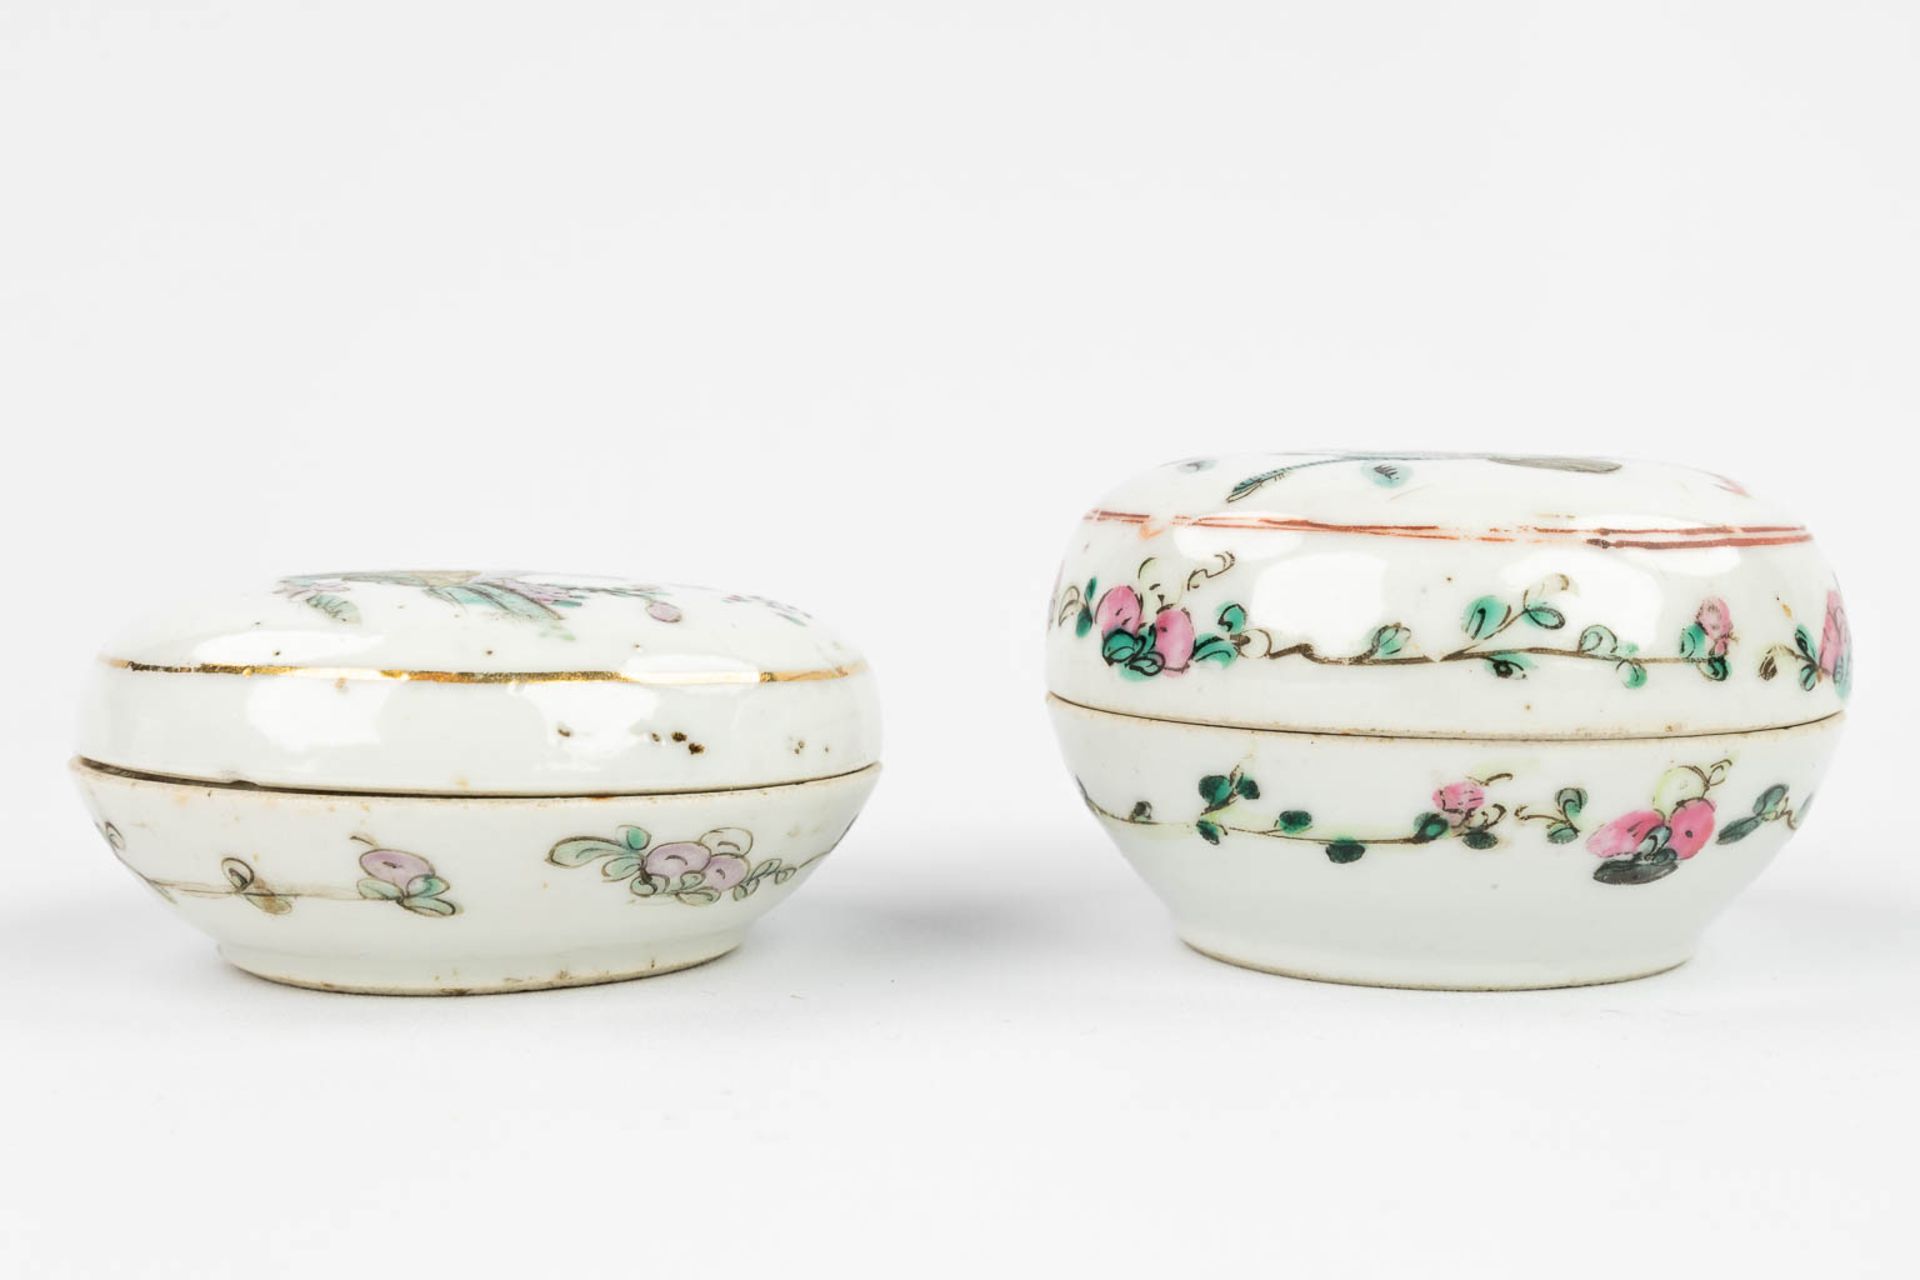 AÊset of 2 Chinese pots with lid, with hand-painted decor and made of porcelain (5 x 8,5 cm) - Image 9 of 18